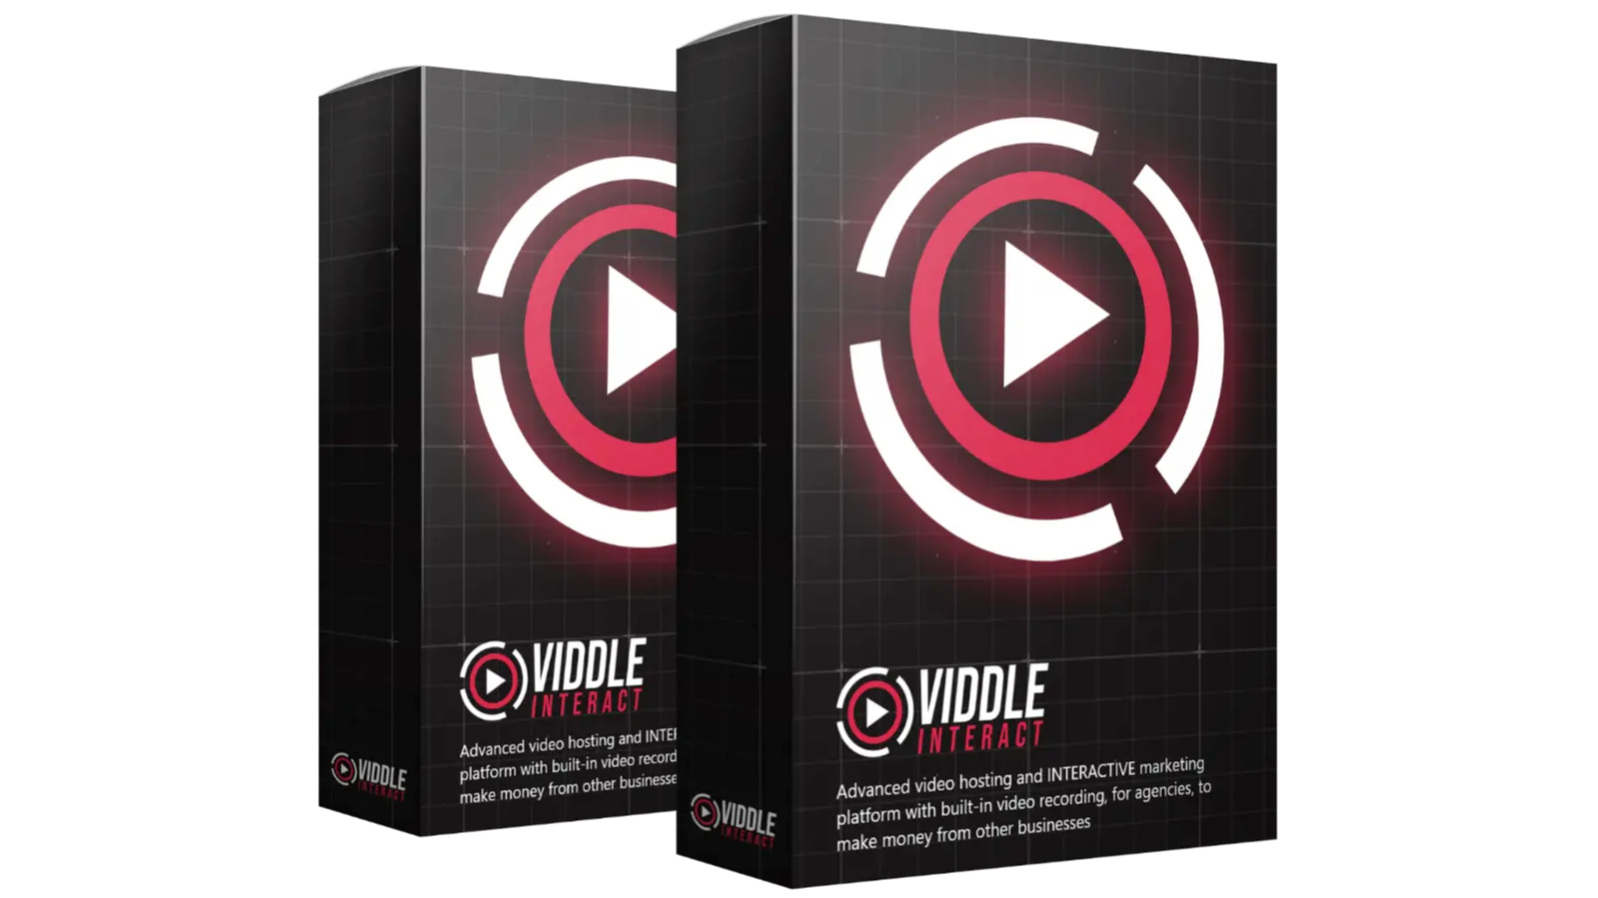 Best Video Hosting & Editing Software For Online Marketing: Viddle Interact 2022